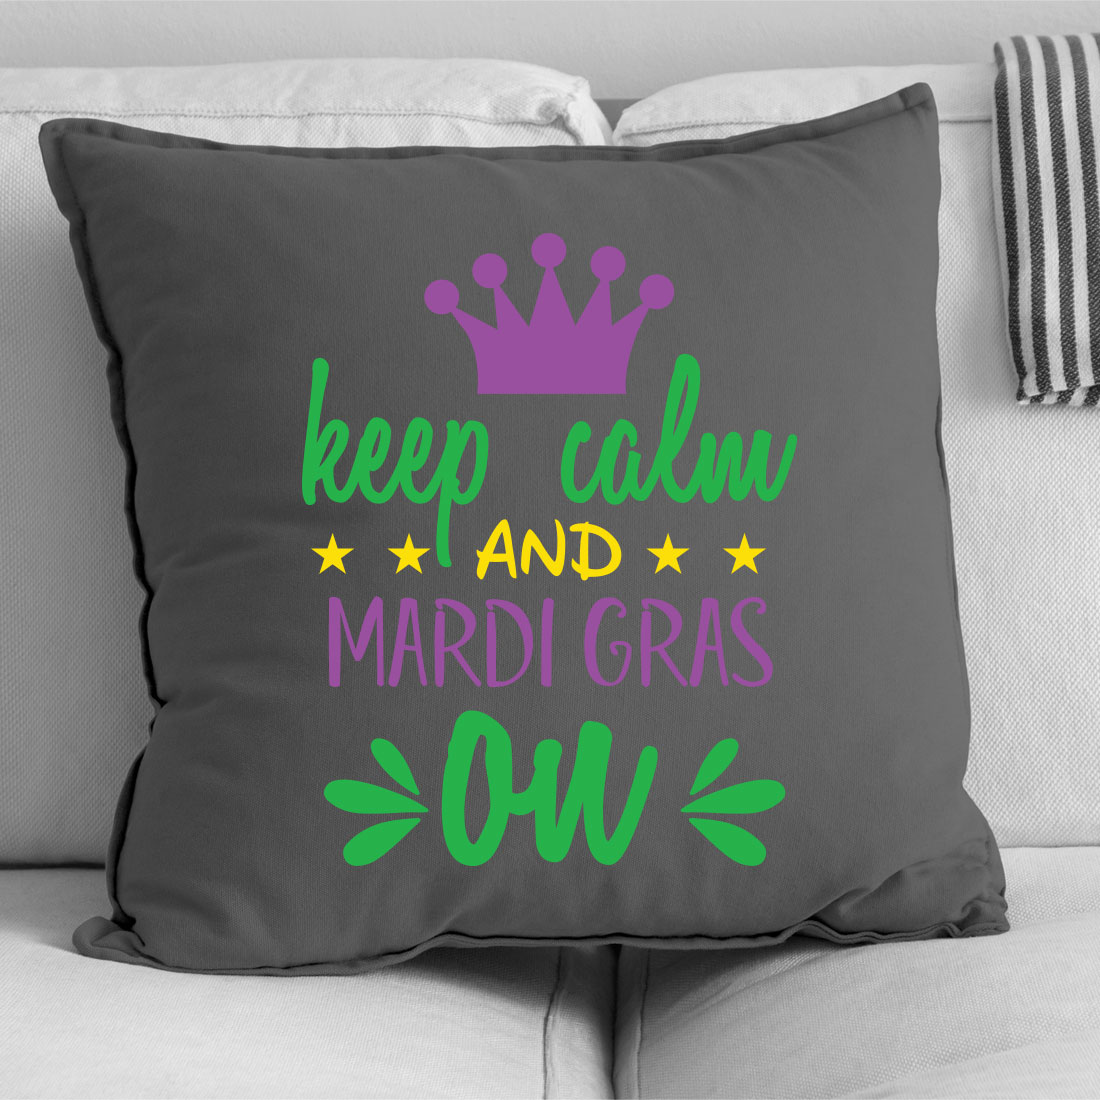 Pillow that says keep calm and mardi gras on.